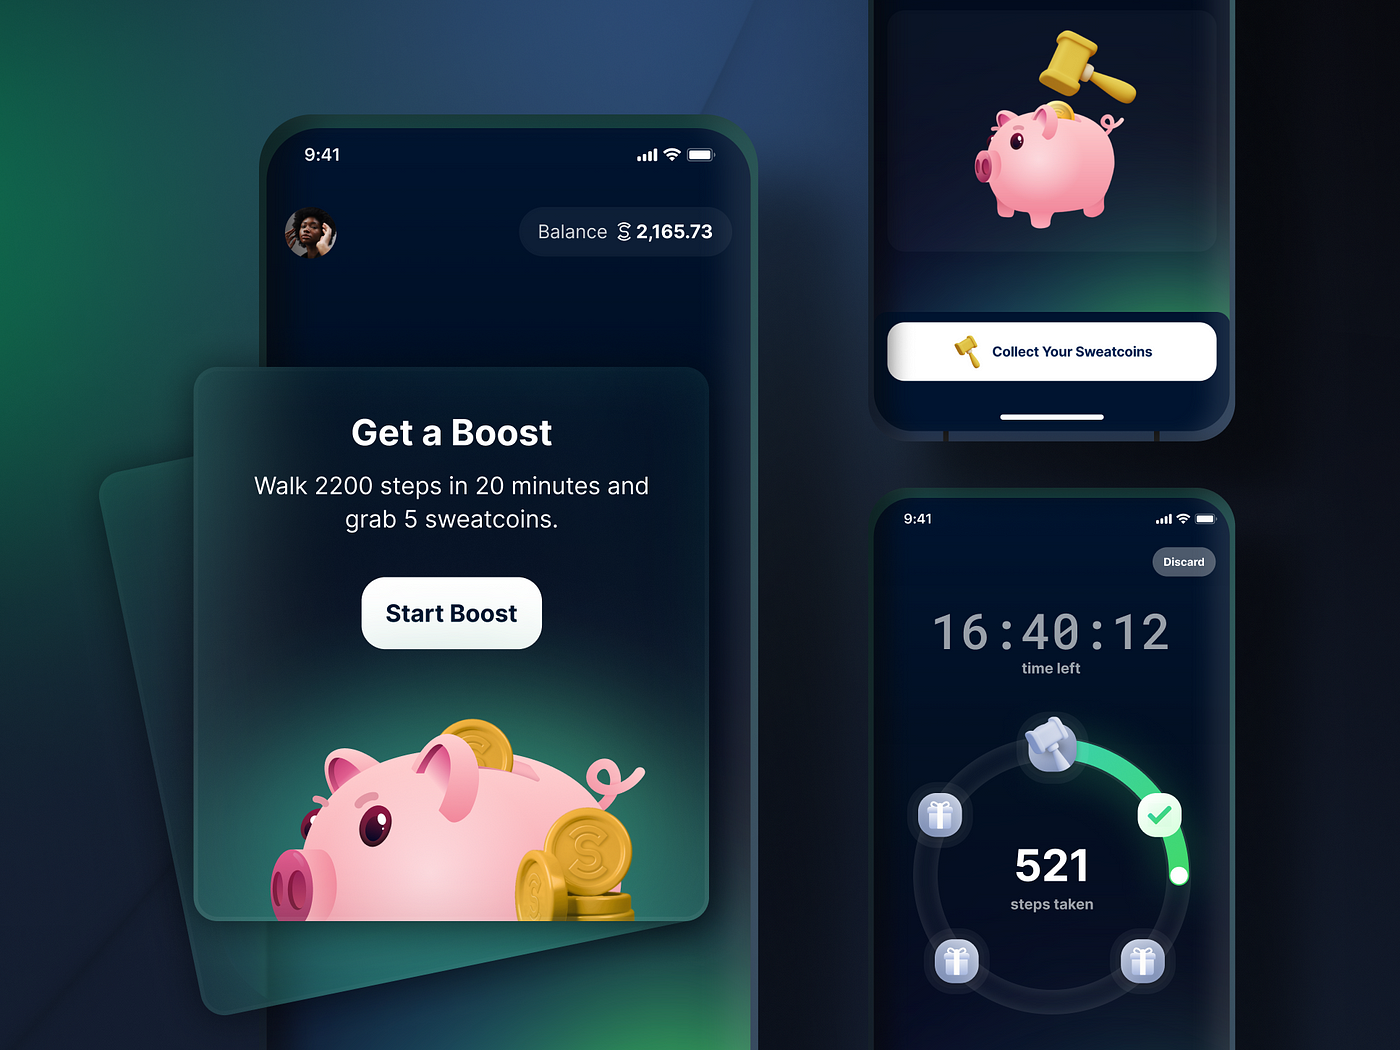 Waiting time minigame by Cabify Design on Dribbble